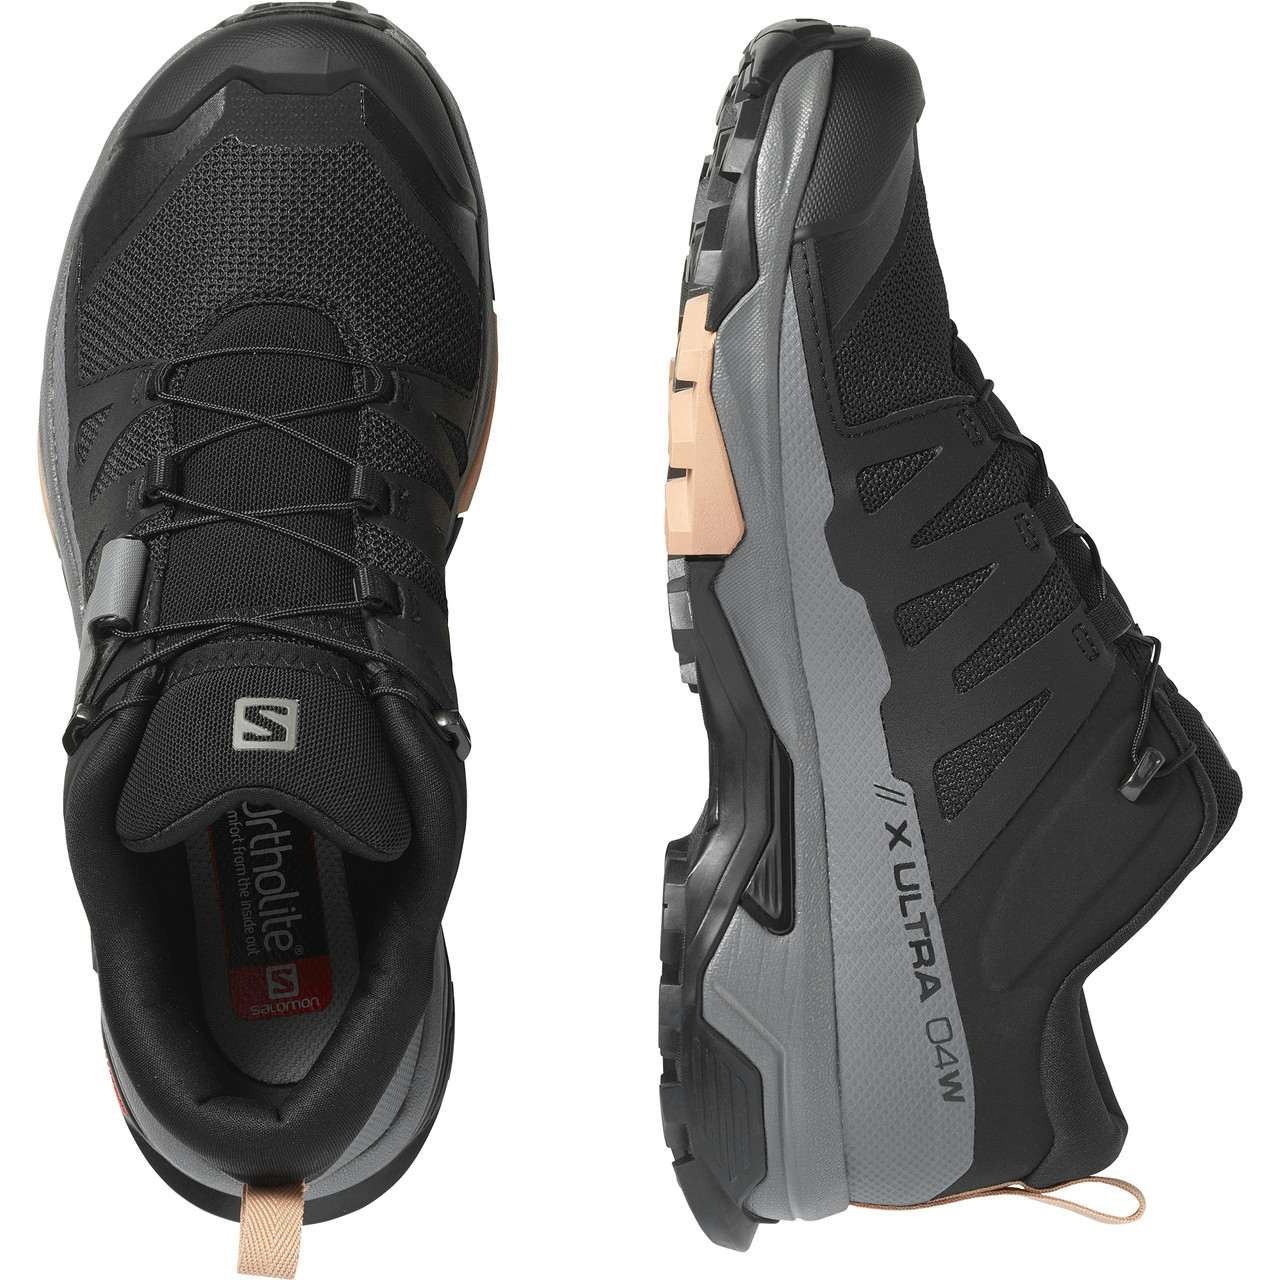 X Ultra 4 Light Trail Shoes Black/Quiet Shade/Sirocco